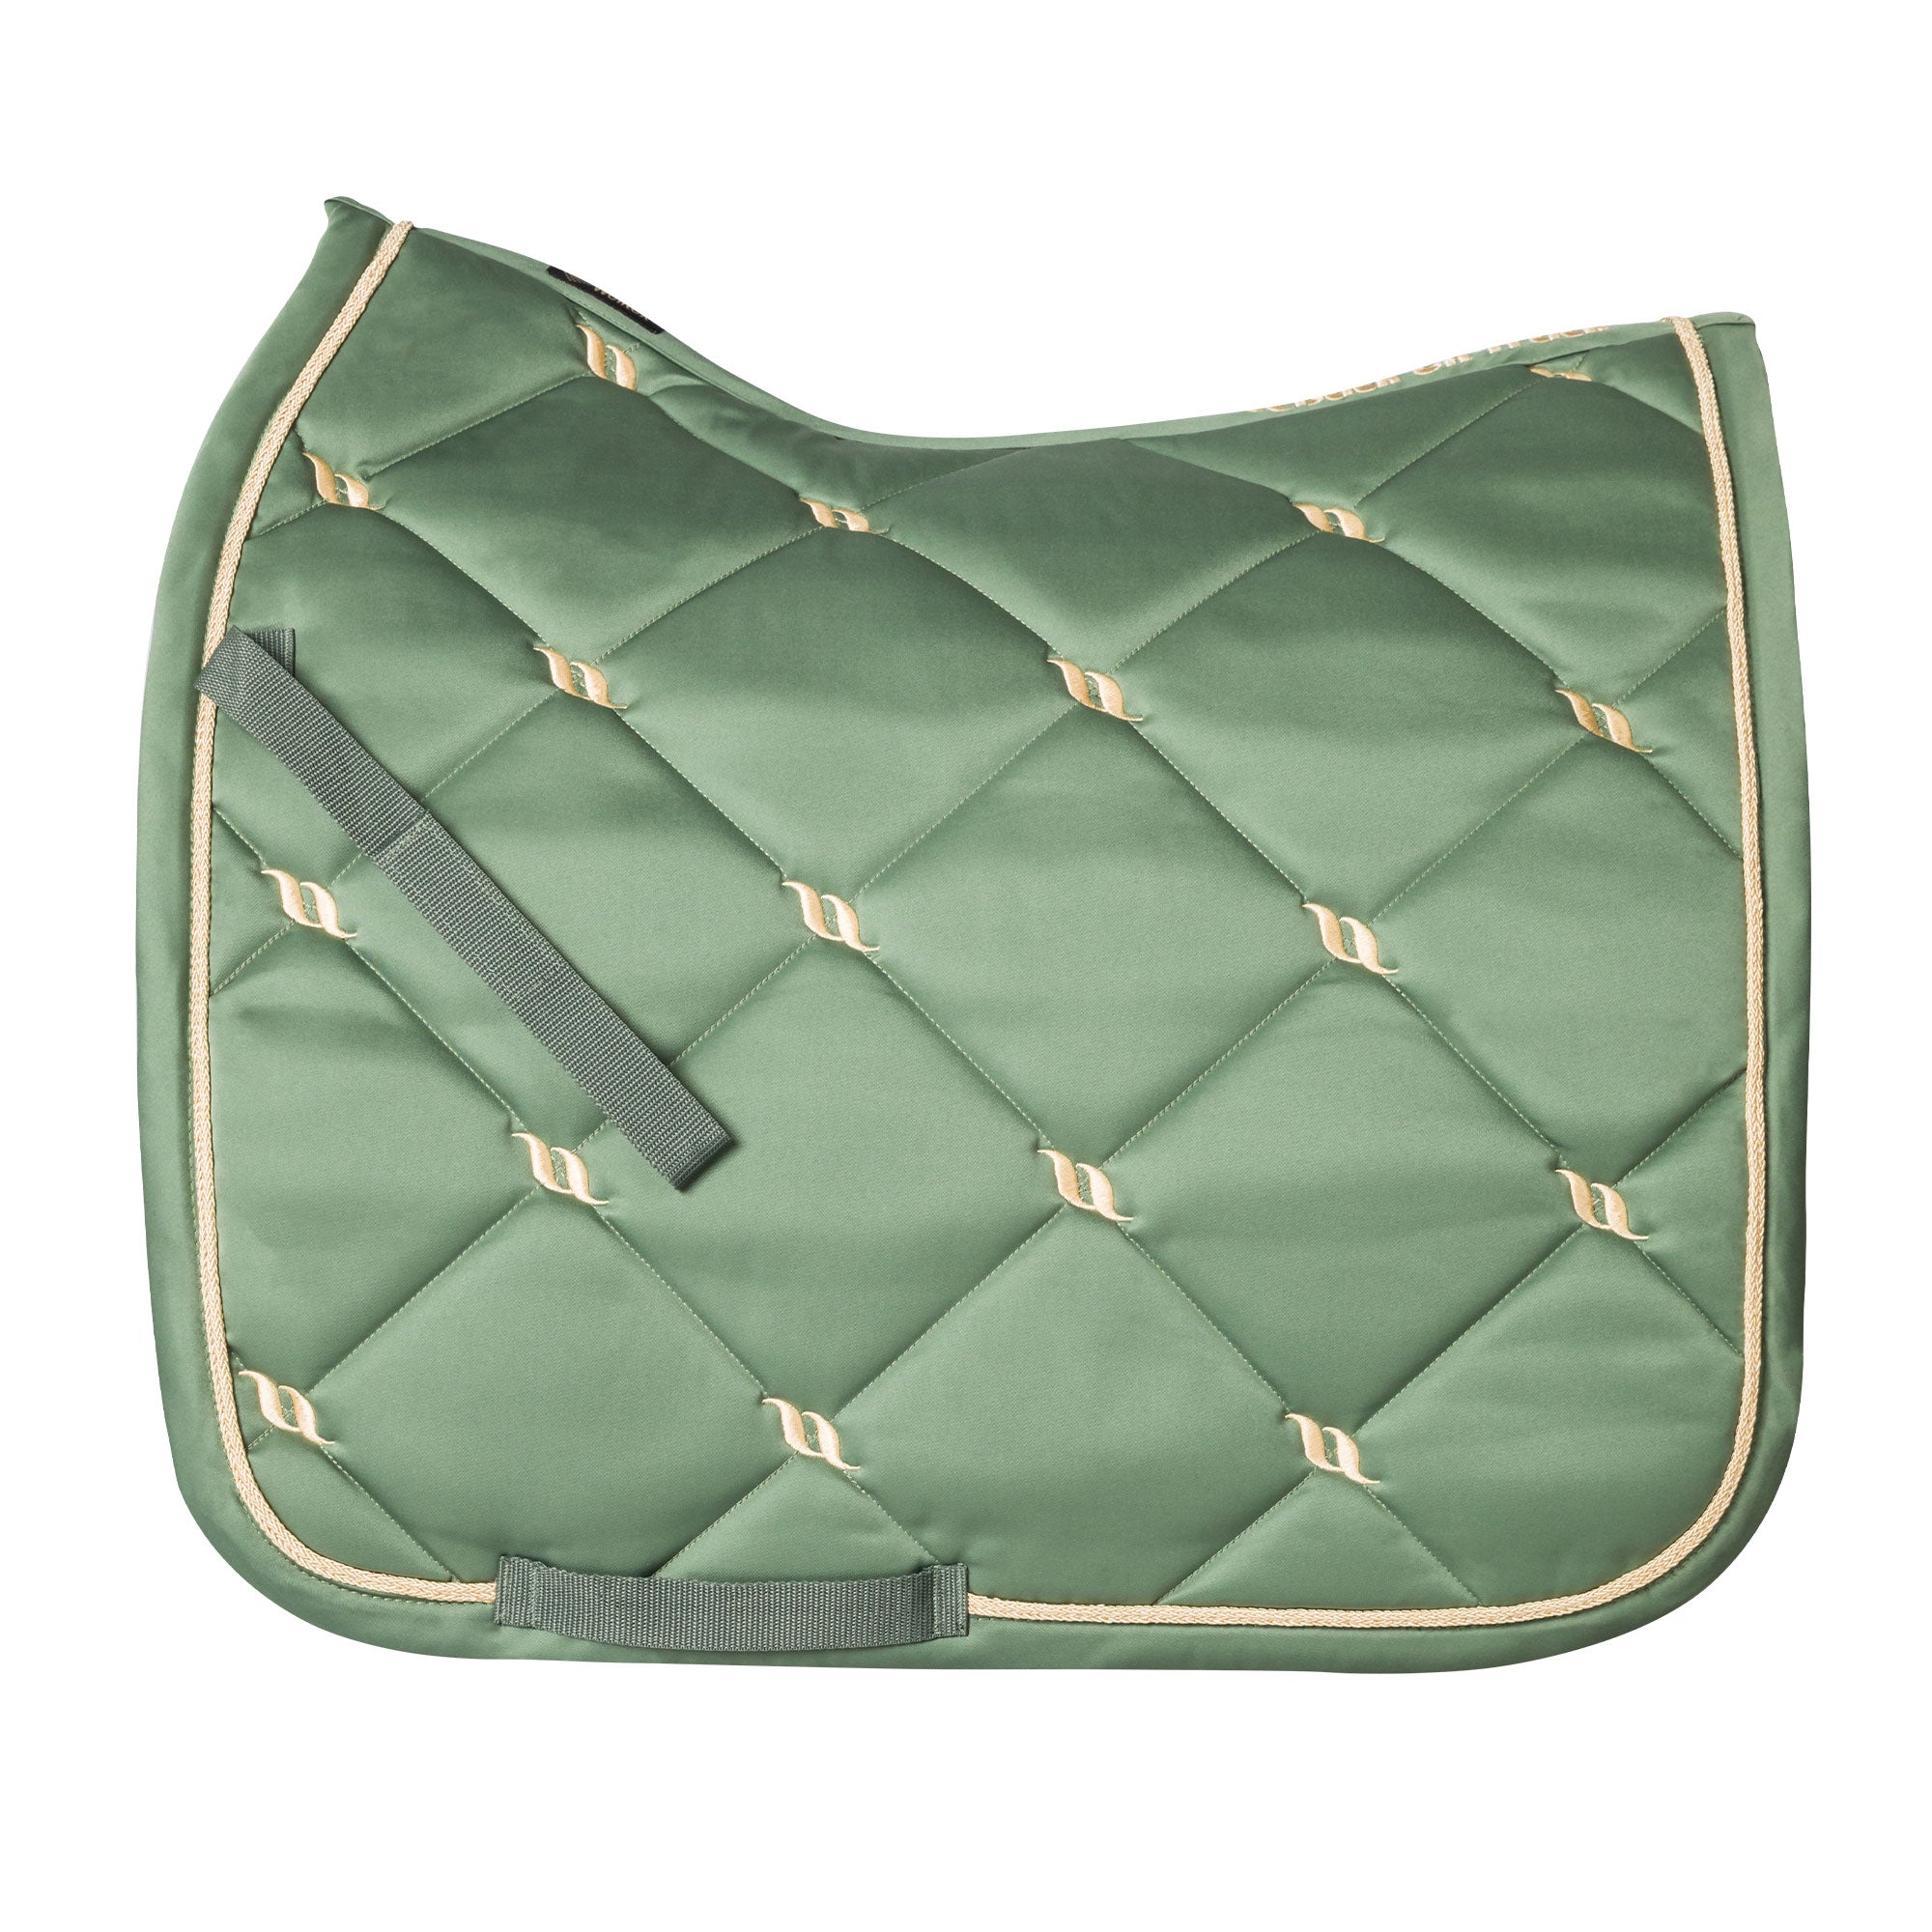 "Nights Collection" Saddle Pad Dressage Olive Green